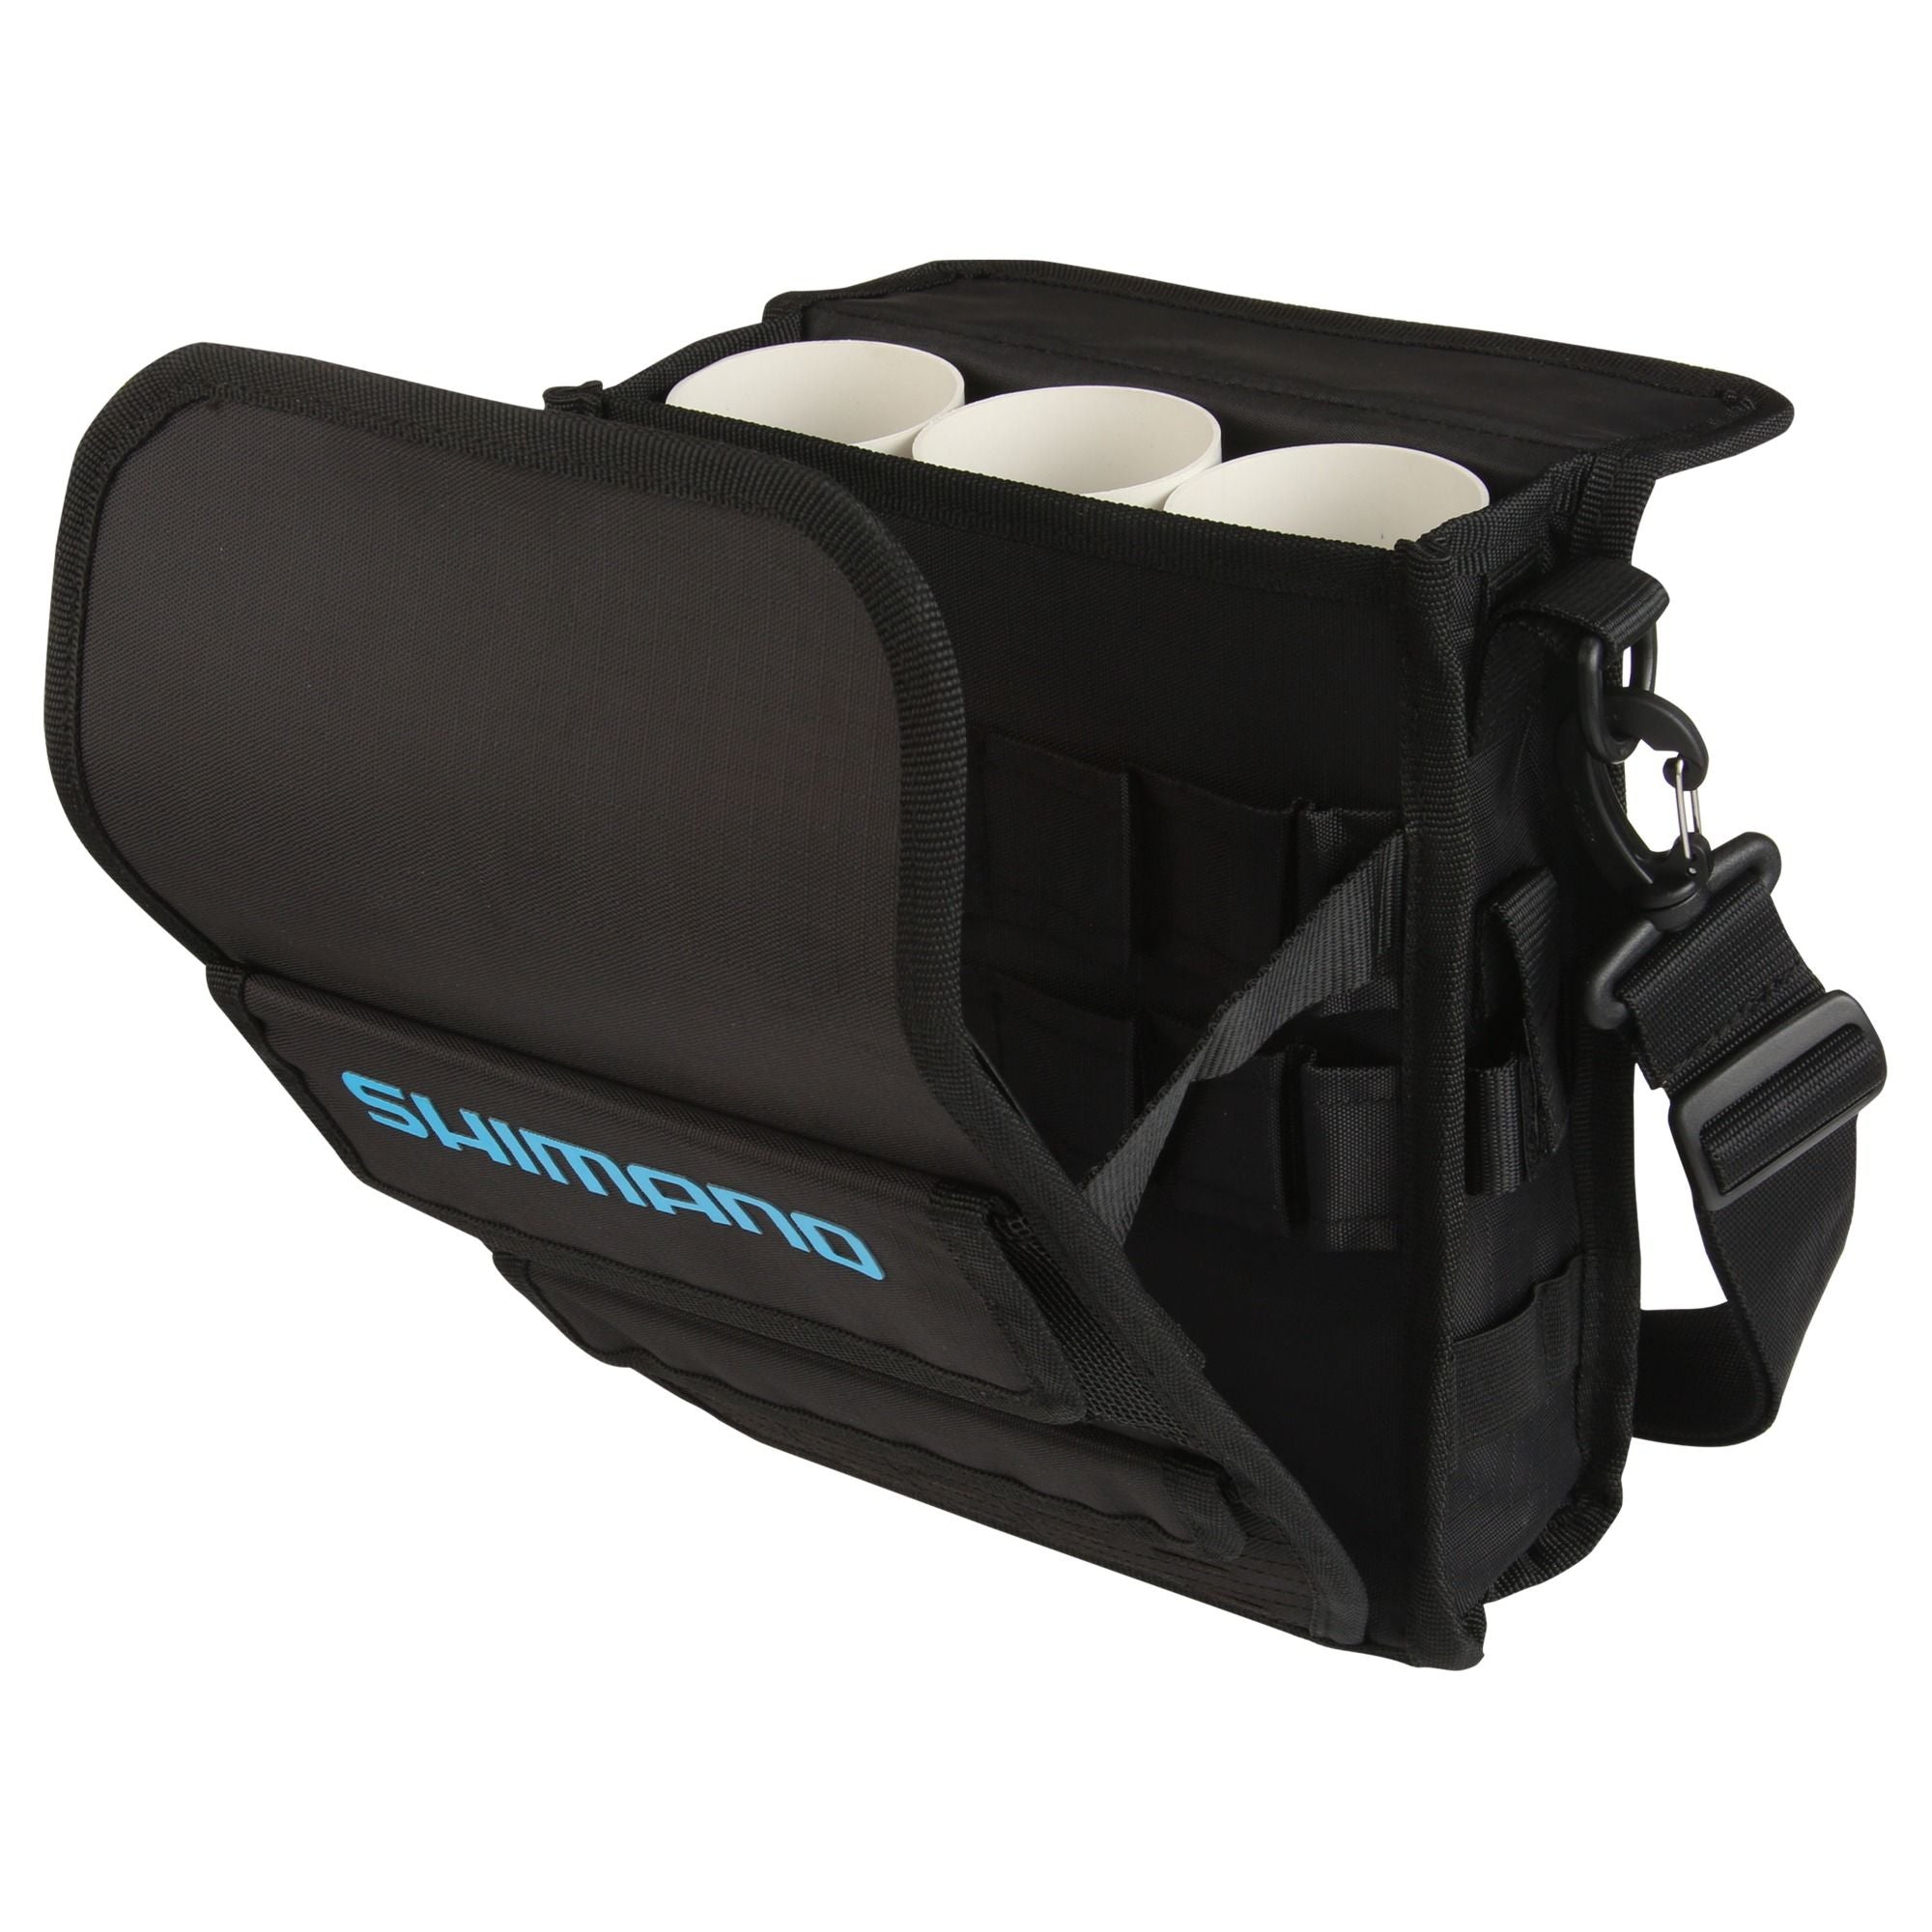 Shimano Bluewave Surf Bags